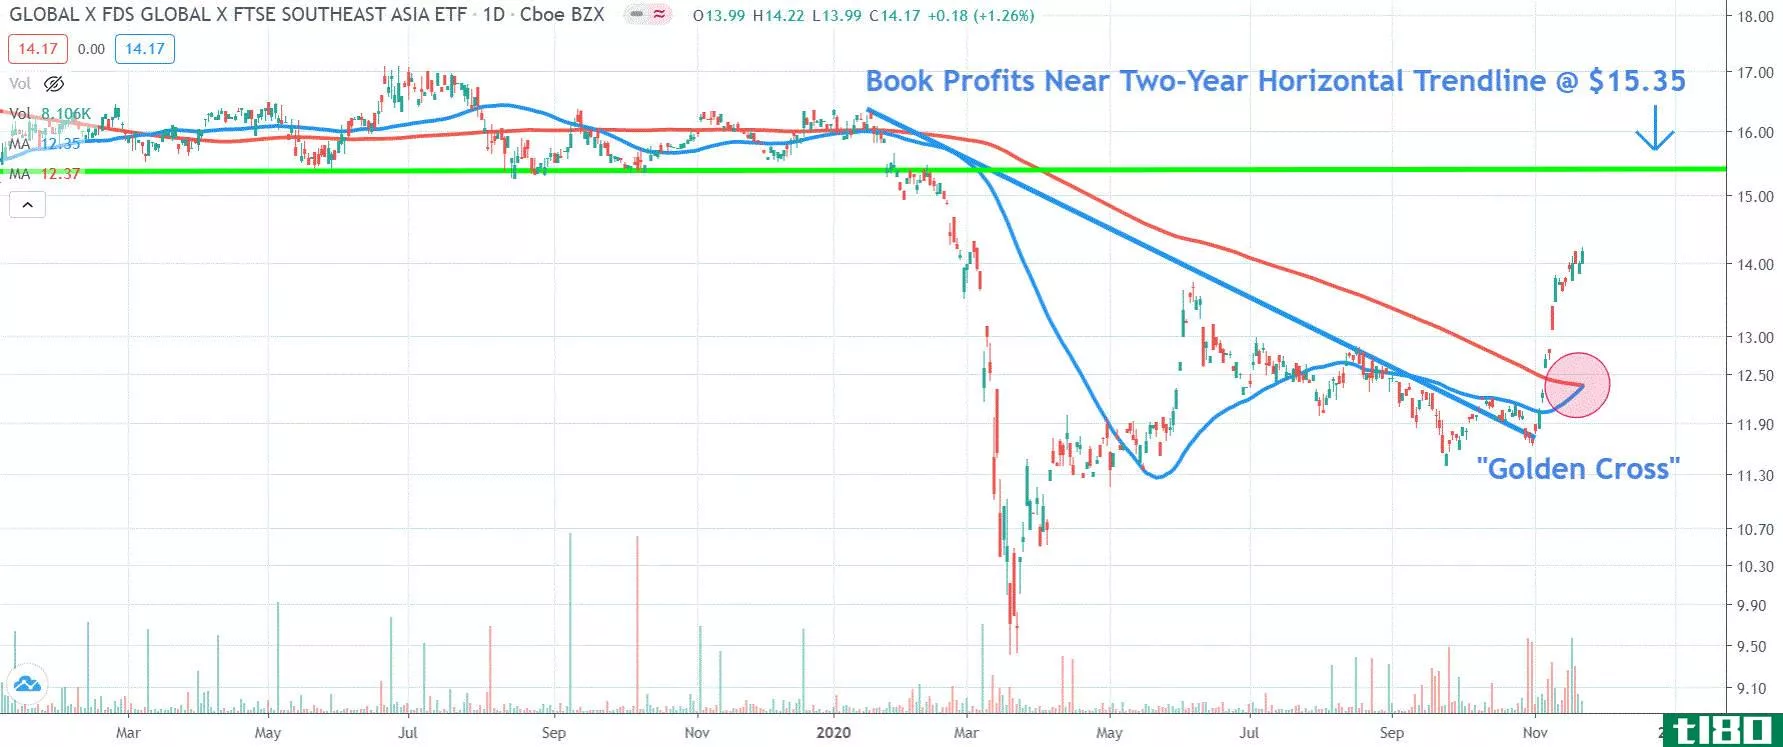 Chart depicting the share price of the Global X FTSE Southeast Asia ETF (ASEA)